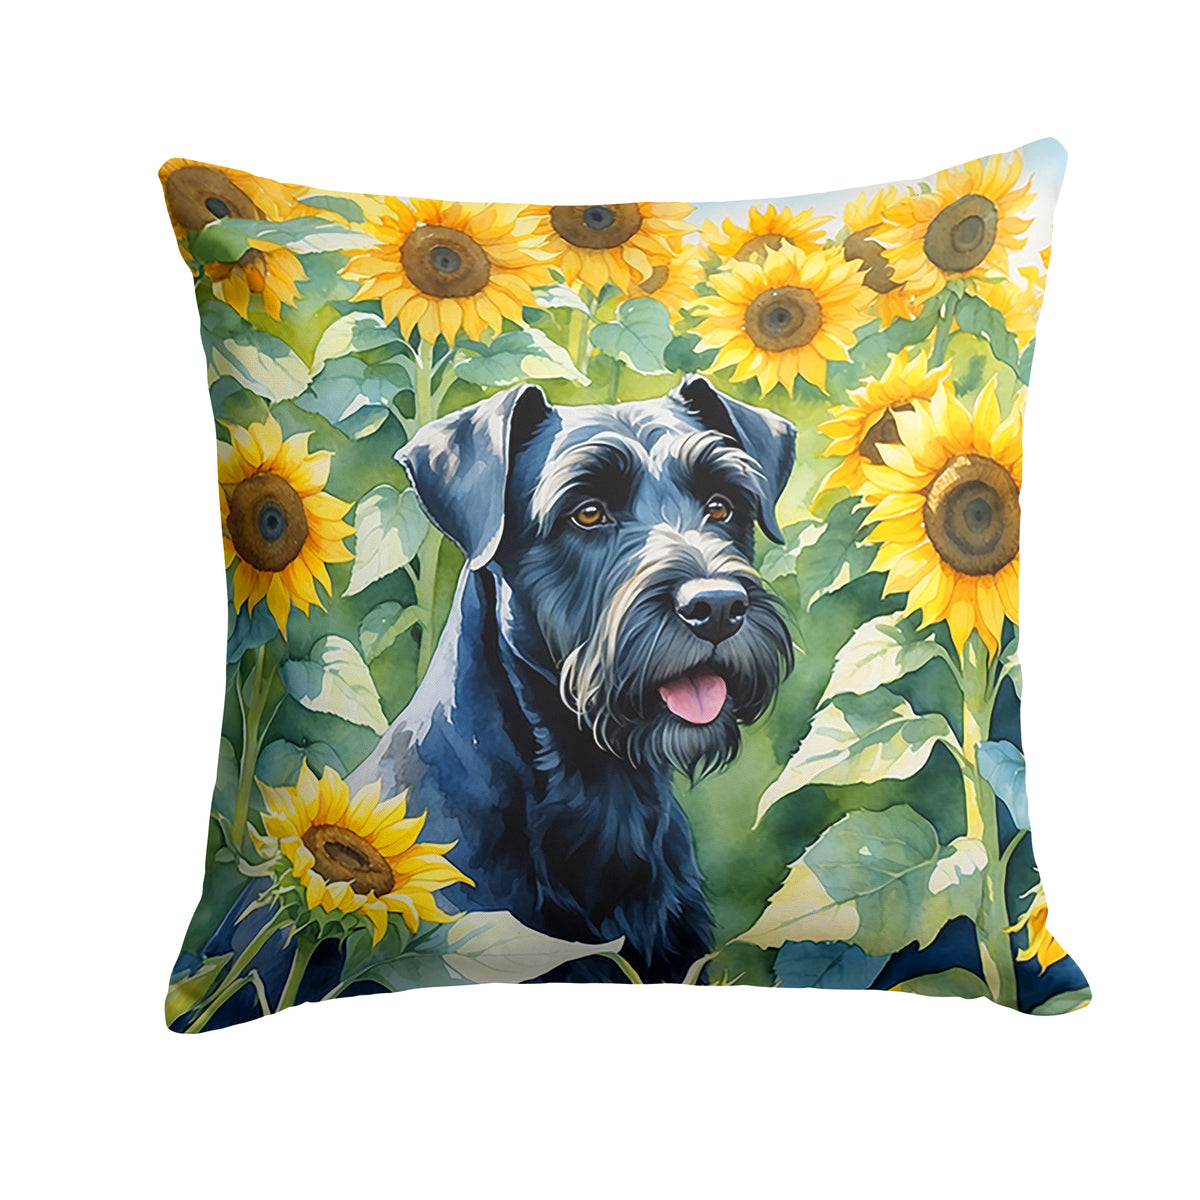 Buy this Giant Schnauzer in Sunflowers Throw Pillow